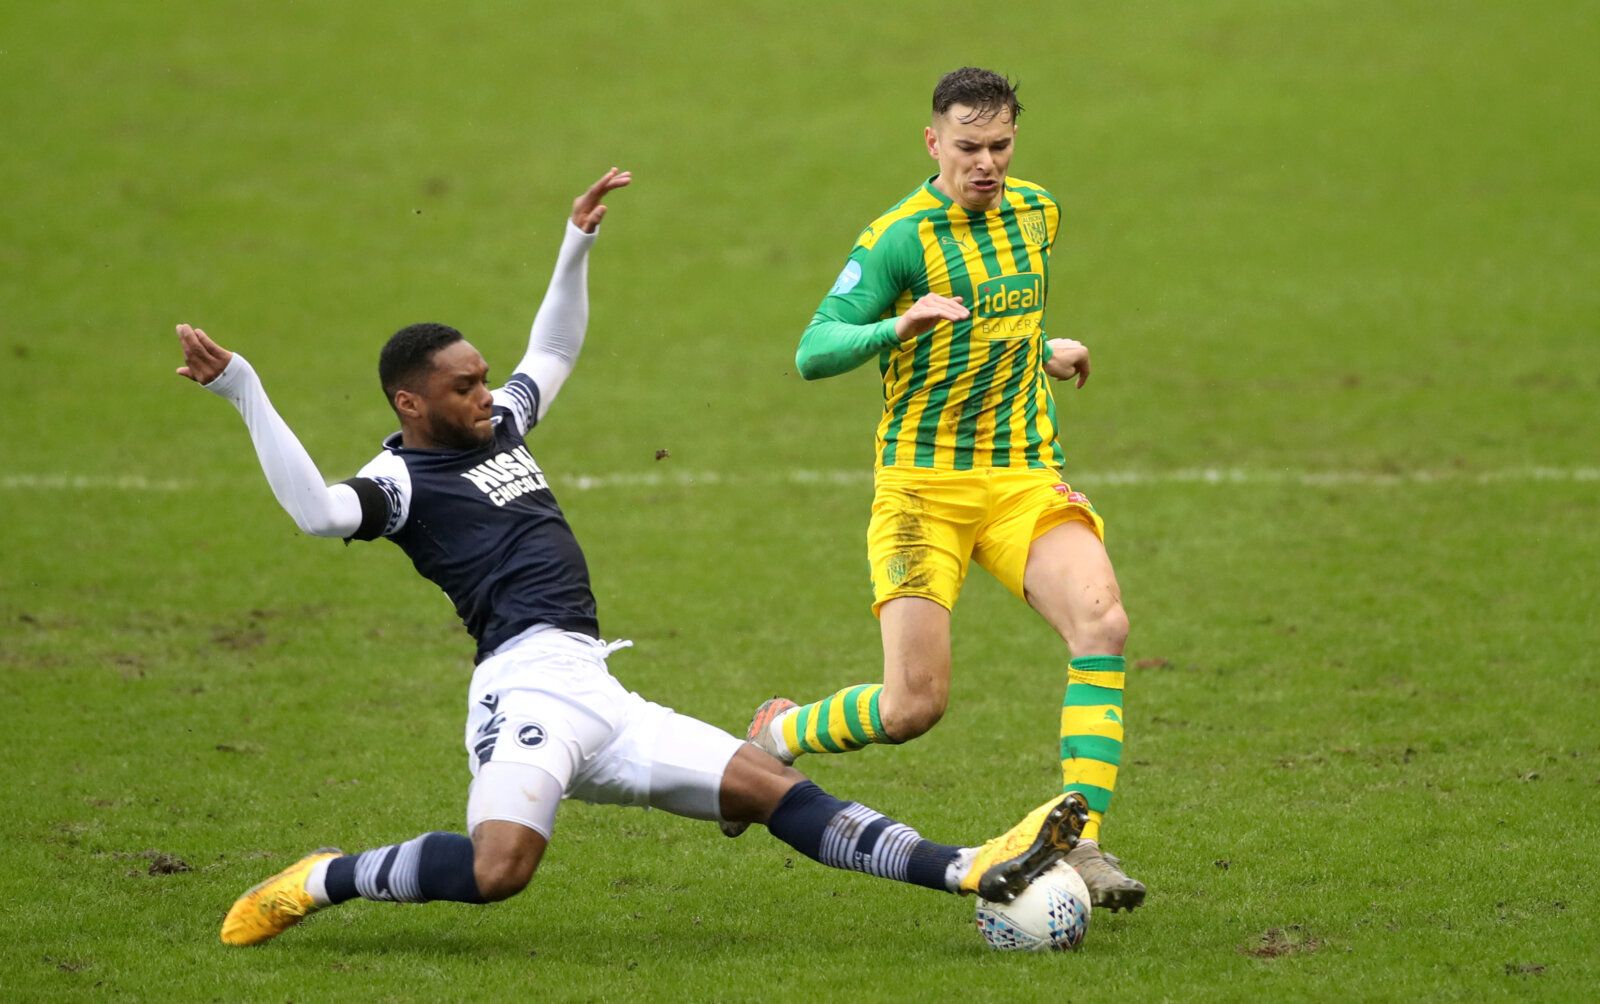 Soccer Football - Championship - Millwall v West Bromwich Albion - The Den, London, Britain - February 9, 2020   Millwall's Mahlon Romeo in action with West Bromwich Albion's Conor Townsend   Action Images/Peter Cziborra    EDITORIAL USE ONLY. No use with unauthorized audio, video, data, fixture lists, club/league logos or 